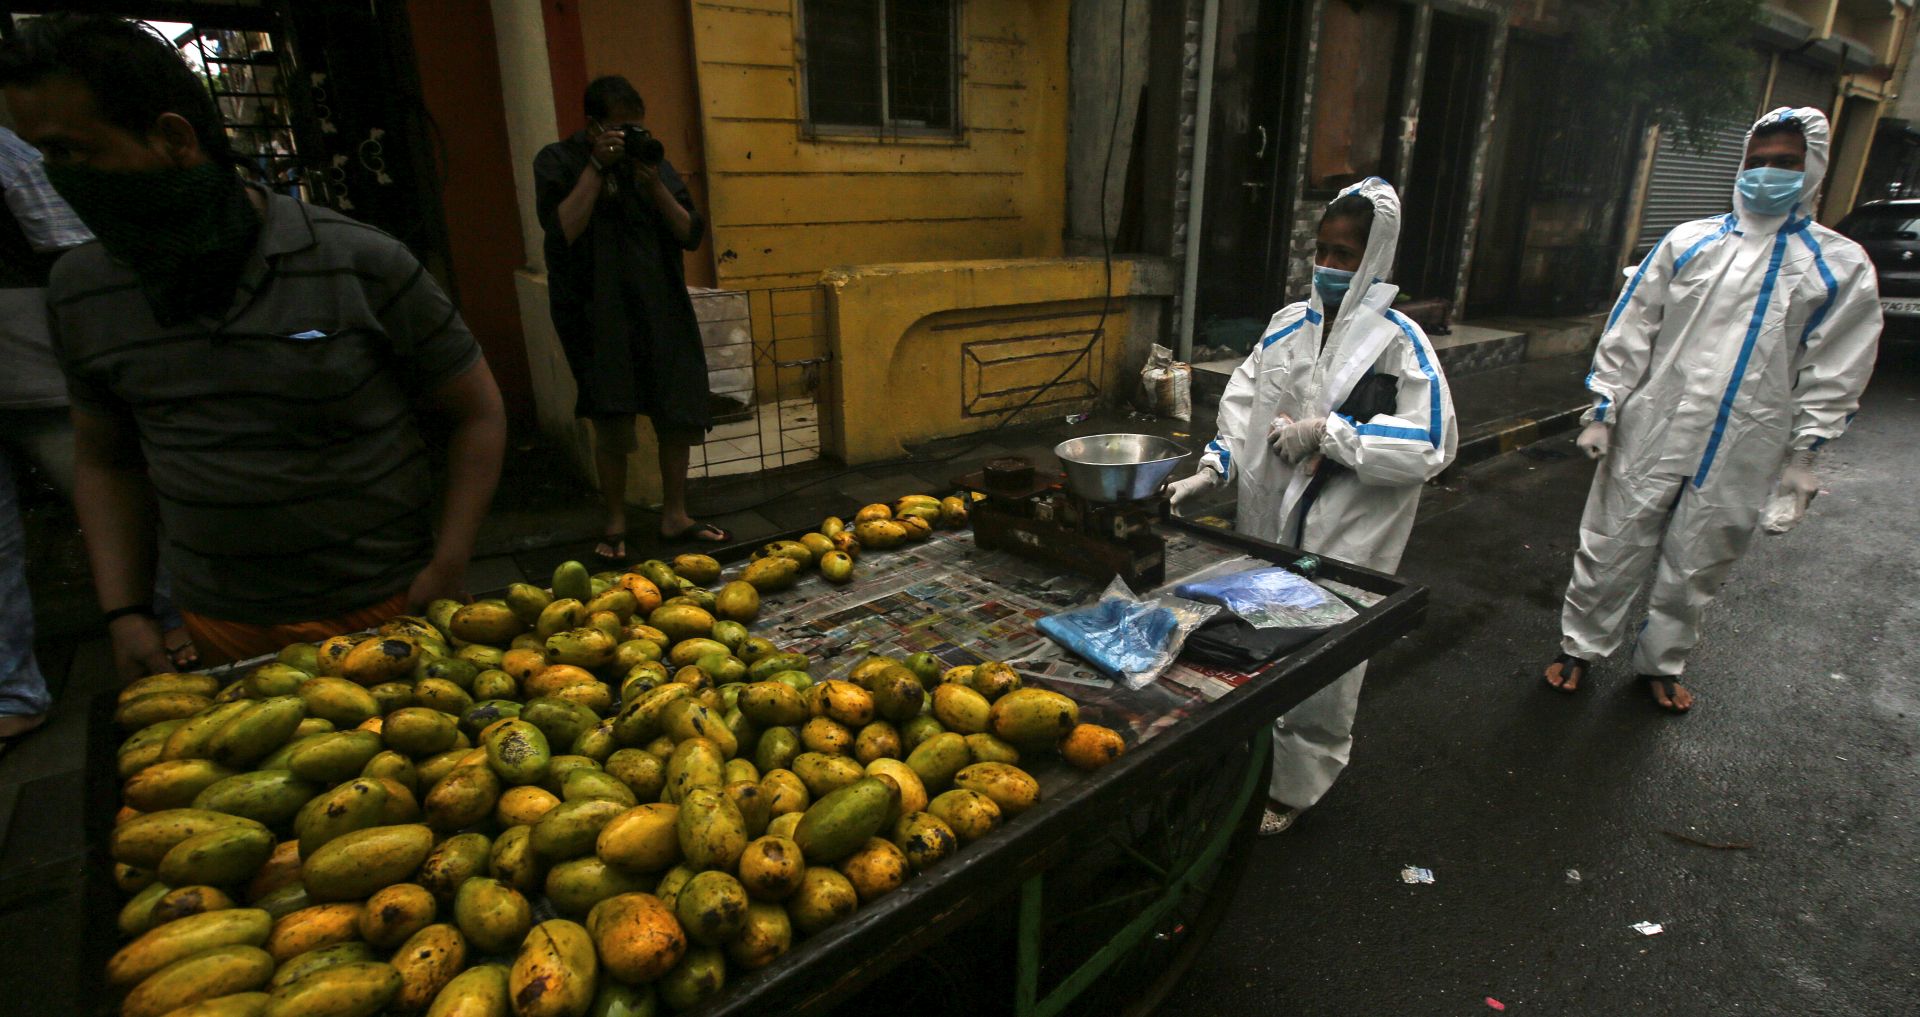 epa08529065 Indian health workers wearing personal protective equipment (PPE) arrive to carry medical checkup of the residents of a 'containment zones' during heavy rains in Mumbai, India, 05 July 2020. According to media reports, the state government of Maharashtra extended the lockdown till 31 July, with some relaxation in the ongoing lockdown.  EPA/DIVYAKANT SOLANKI